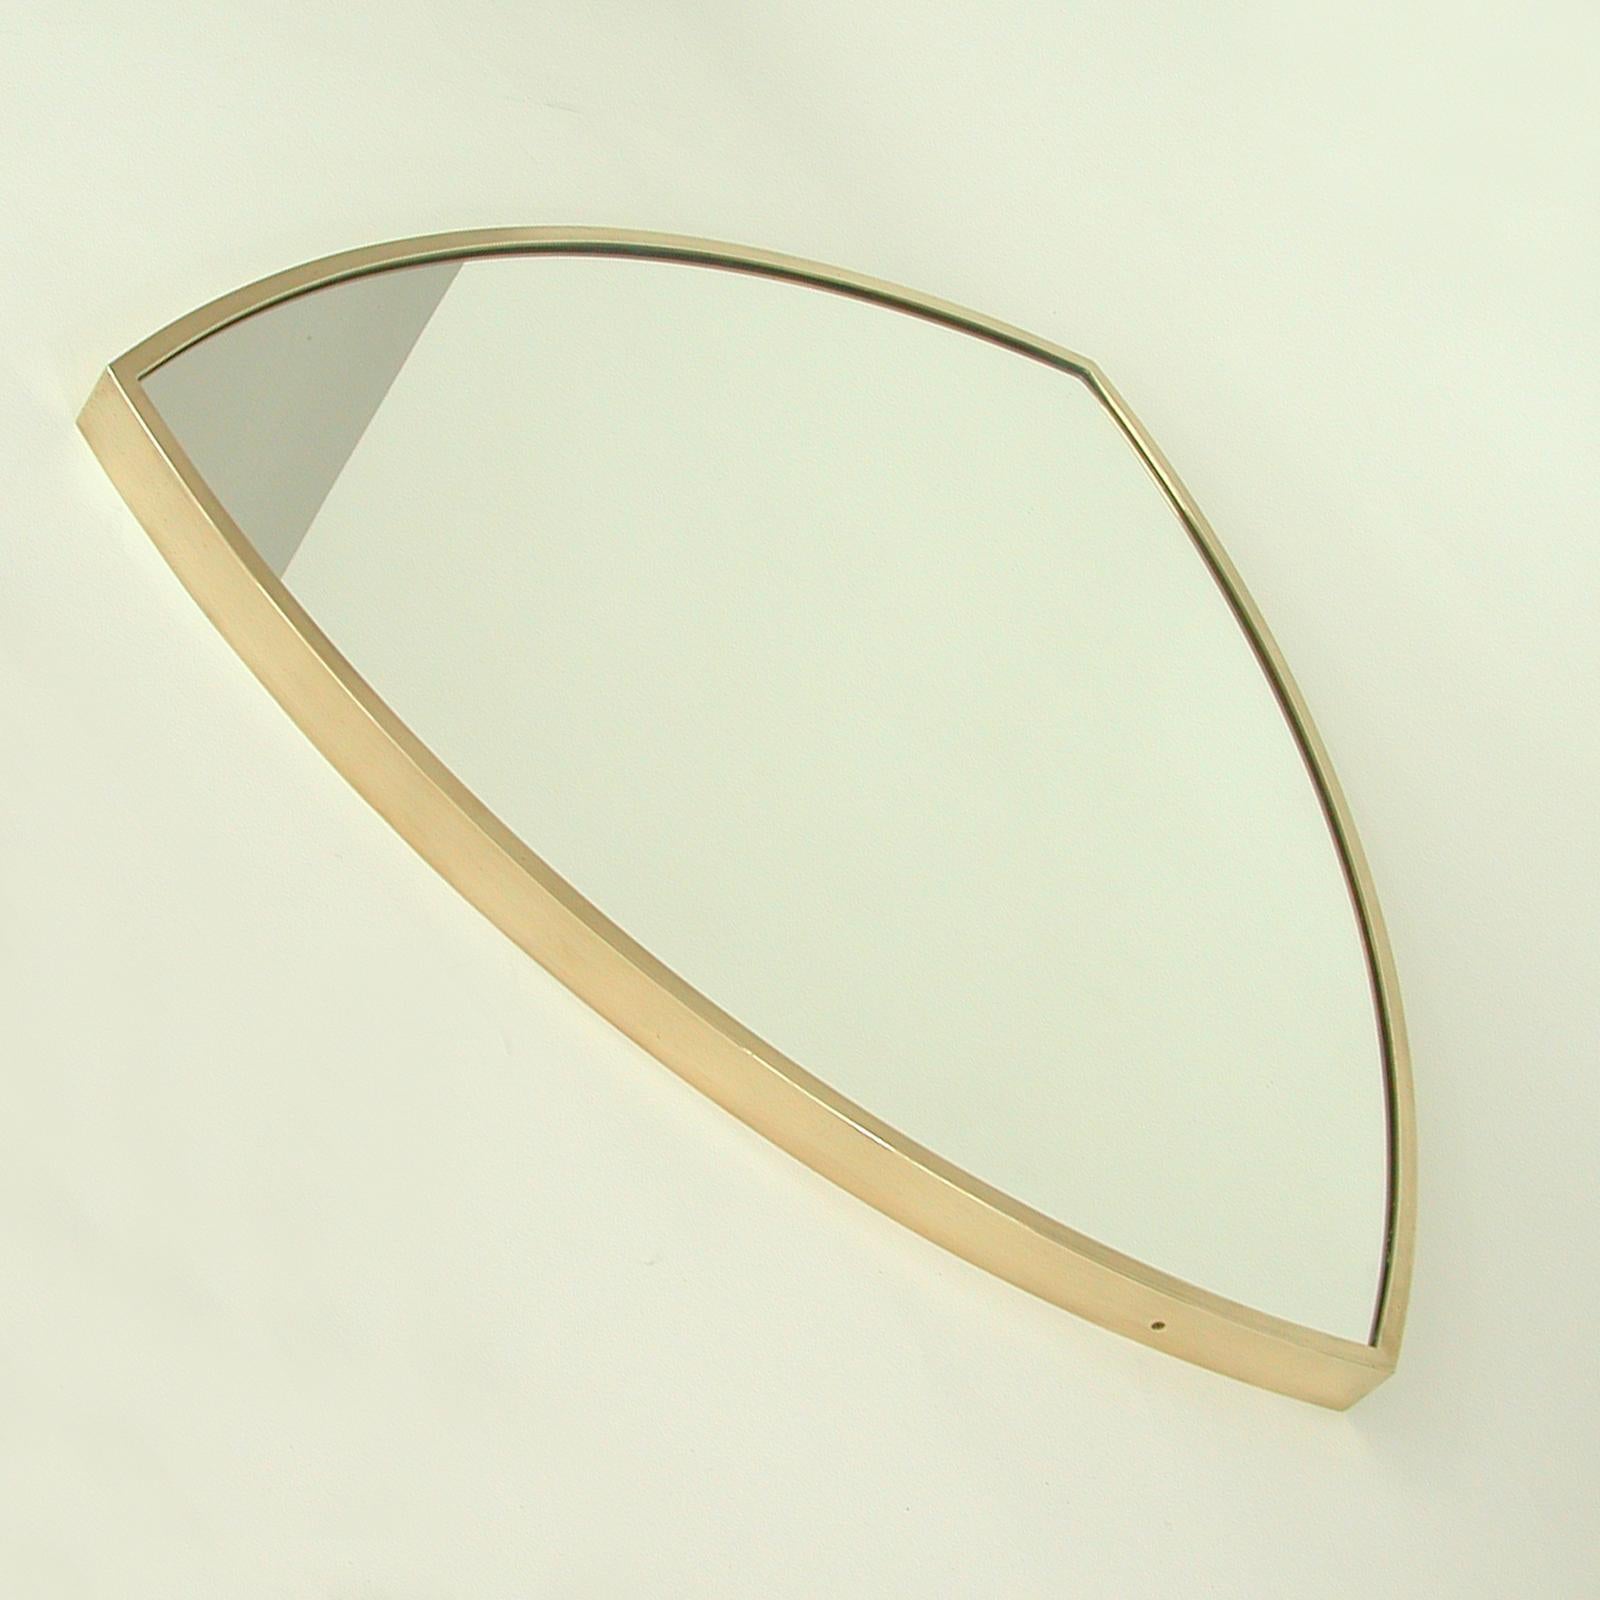 Midcentury Brass Shield Shaped Wall Mirror, Gio Ponti Style, Italy 1950s For Sale 1